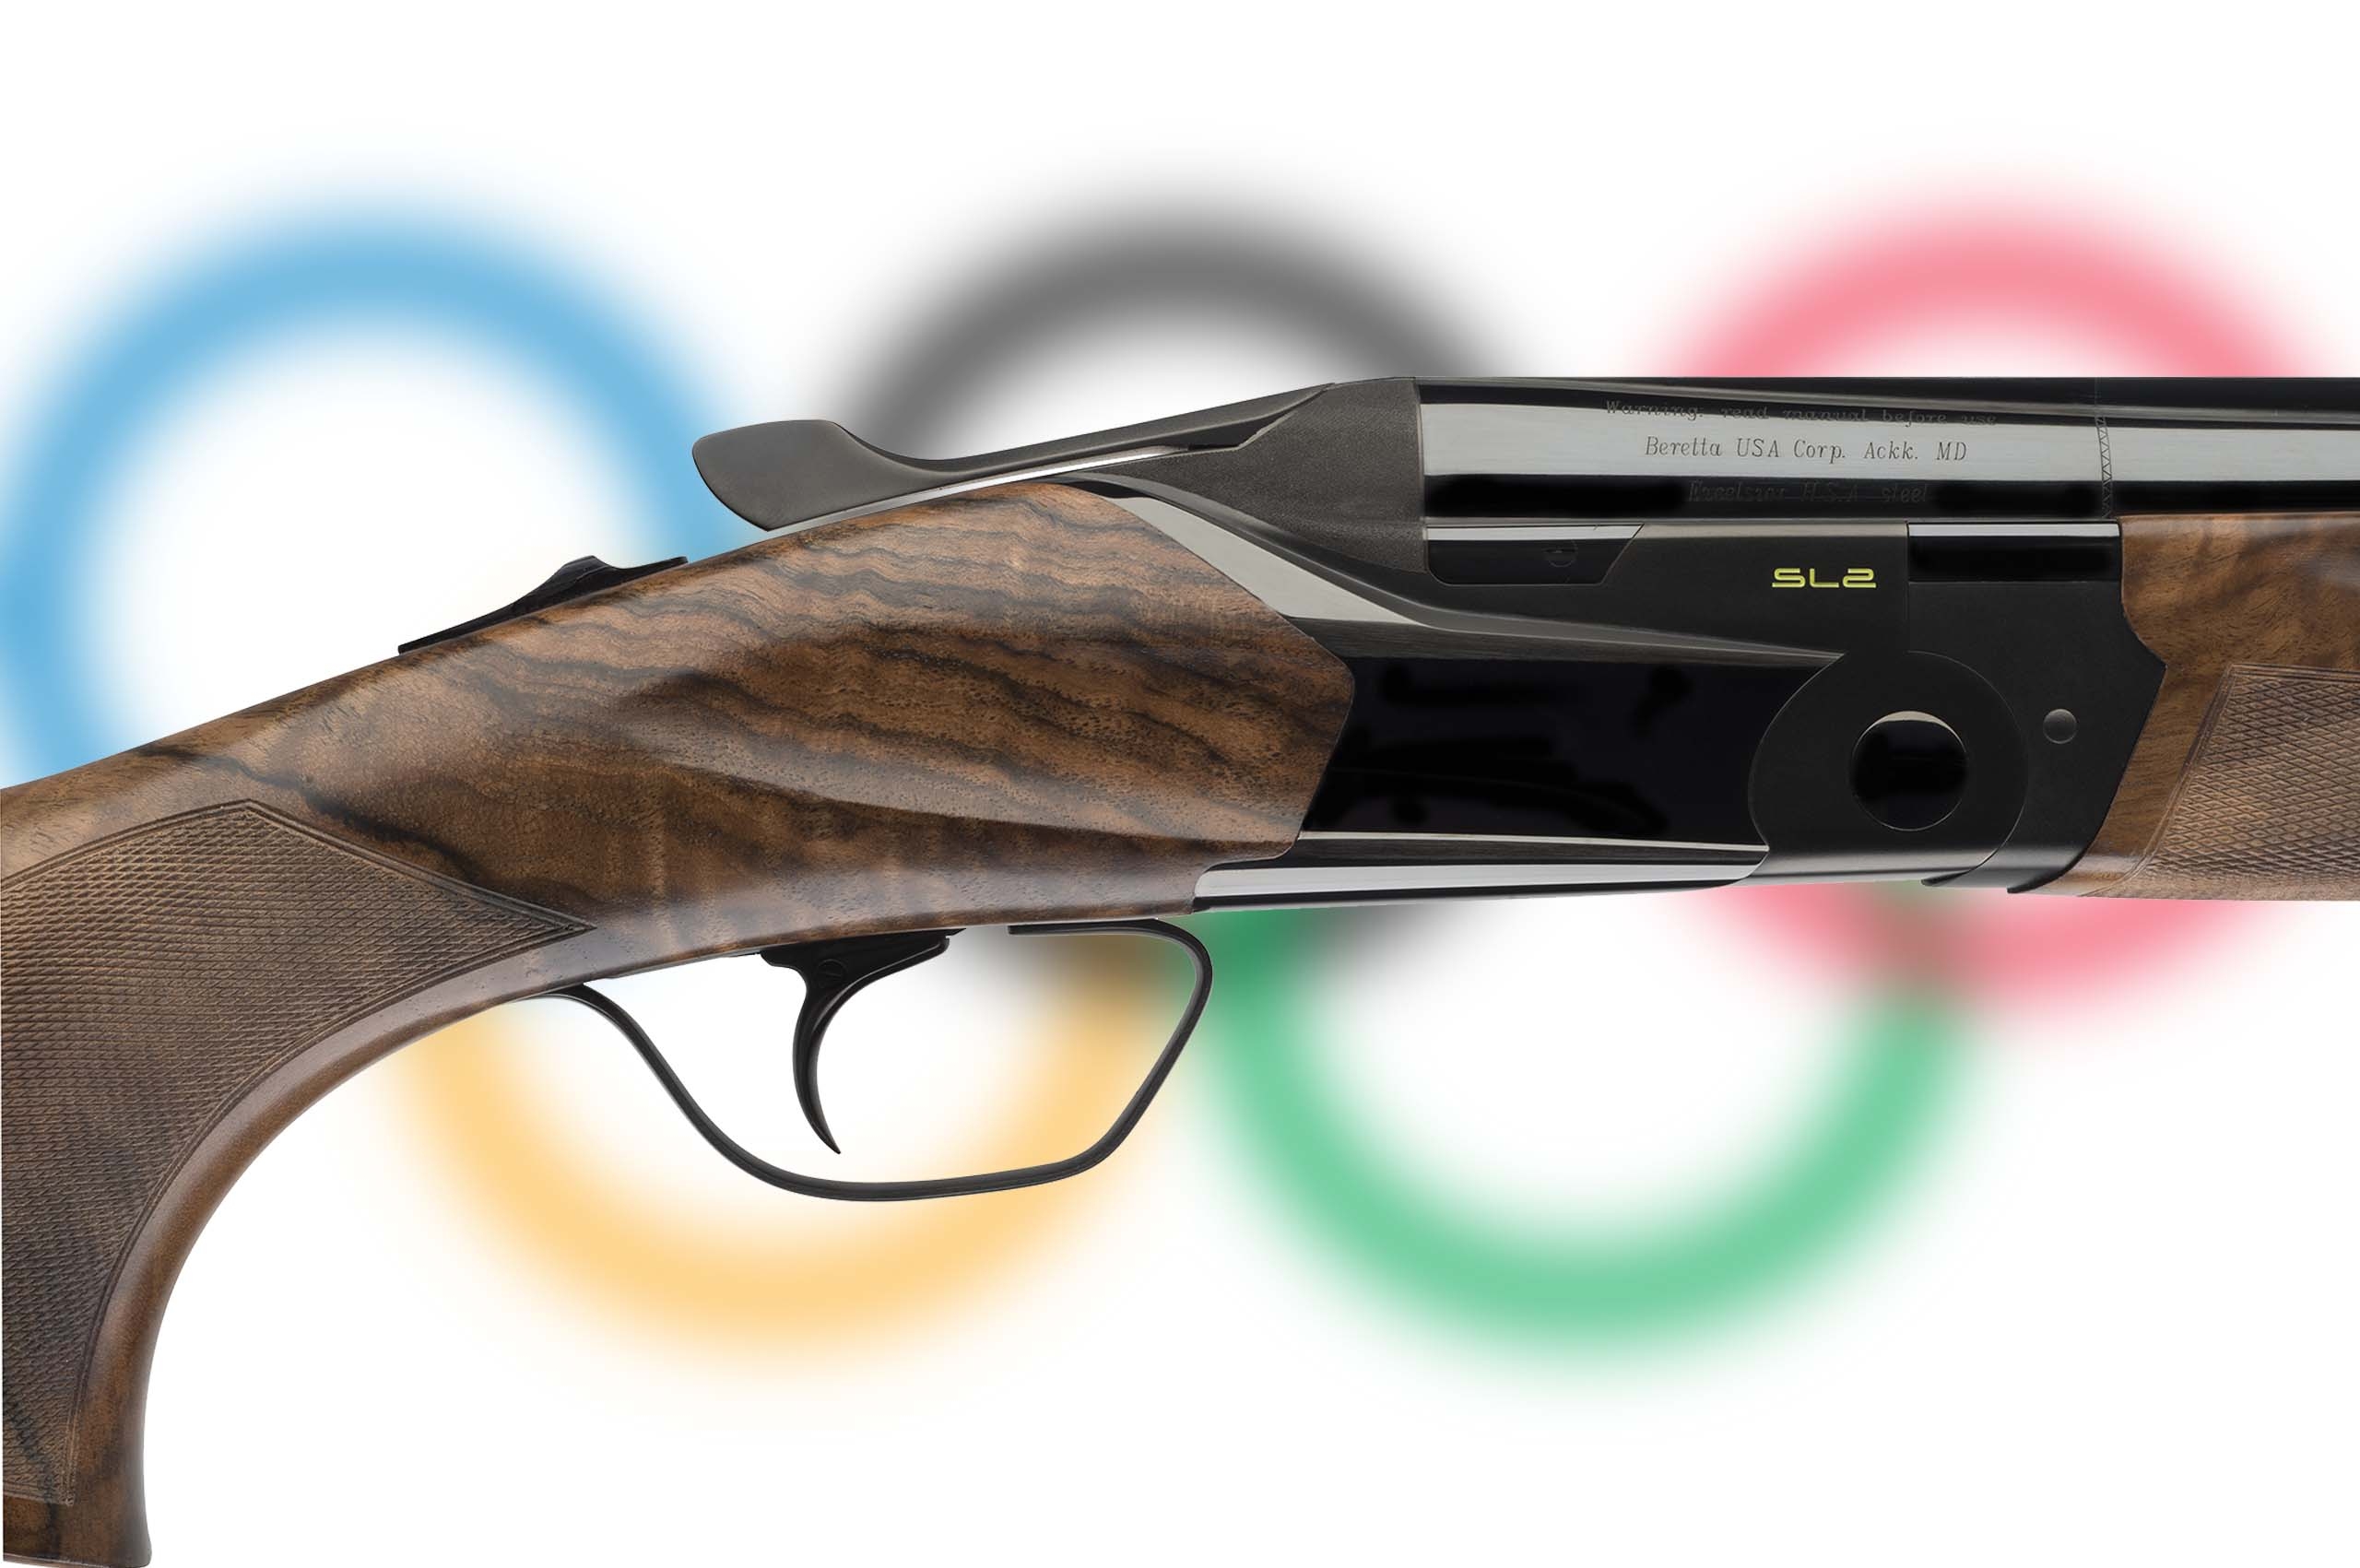 Beretta SL2 Launch Edition The New Scoring Machine Presented To Olympic Champions All4shooters